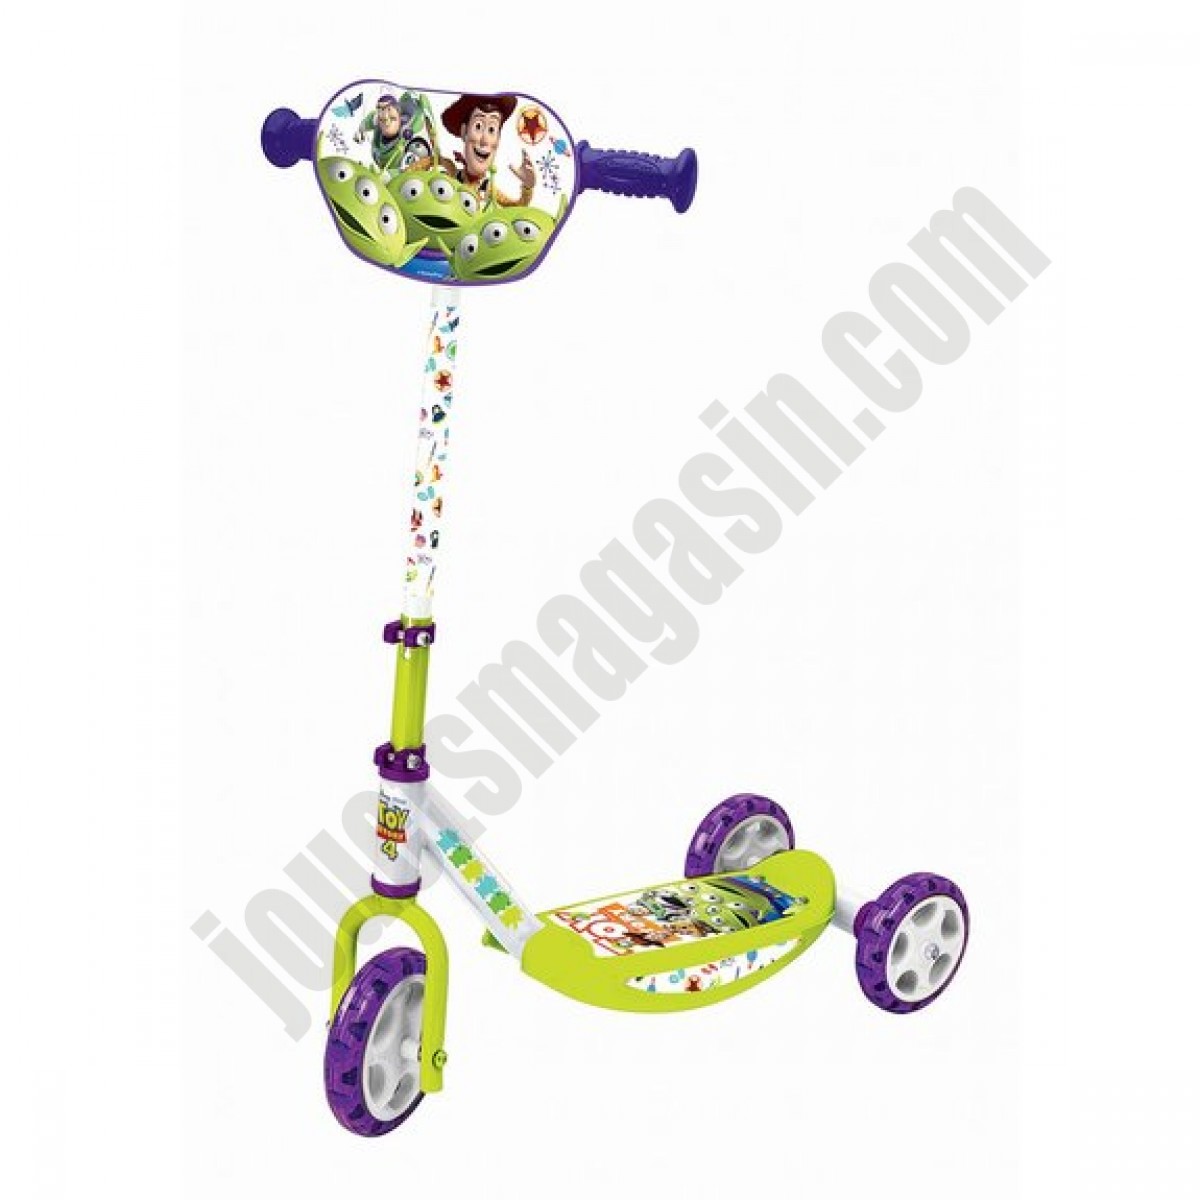 Patinette 3 roues Toy Story En promotion - Patinette 3 roues Toy Story En promotion